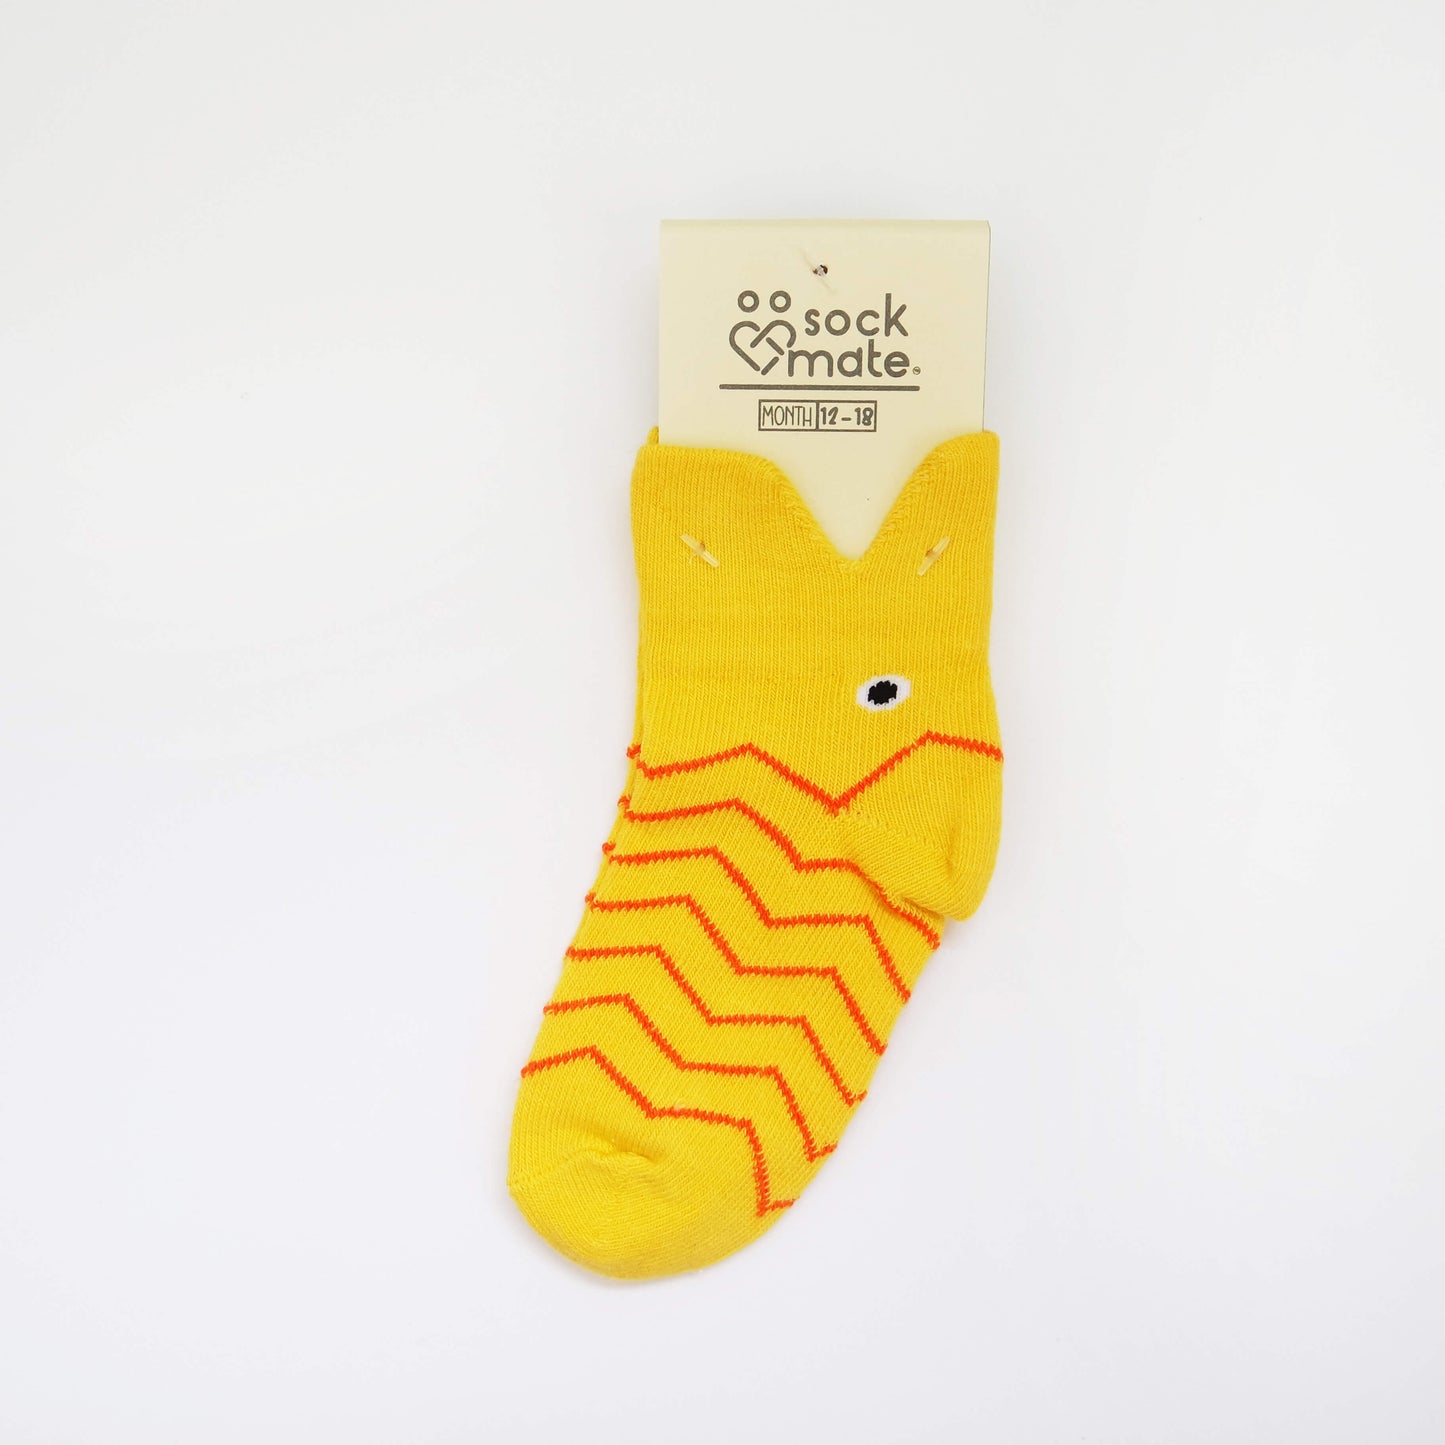  3D yellow fish baby socks, featuring adorable and lifelike fish designs for a playful and cute look.